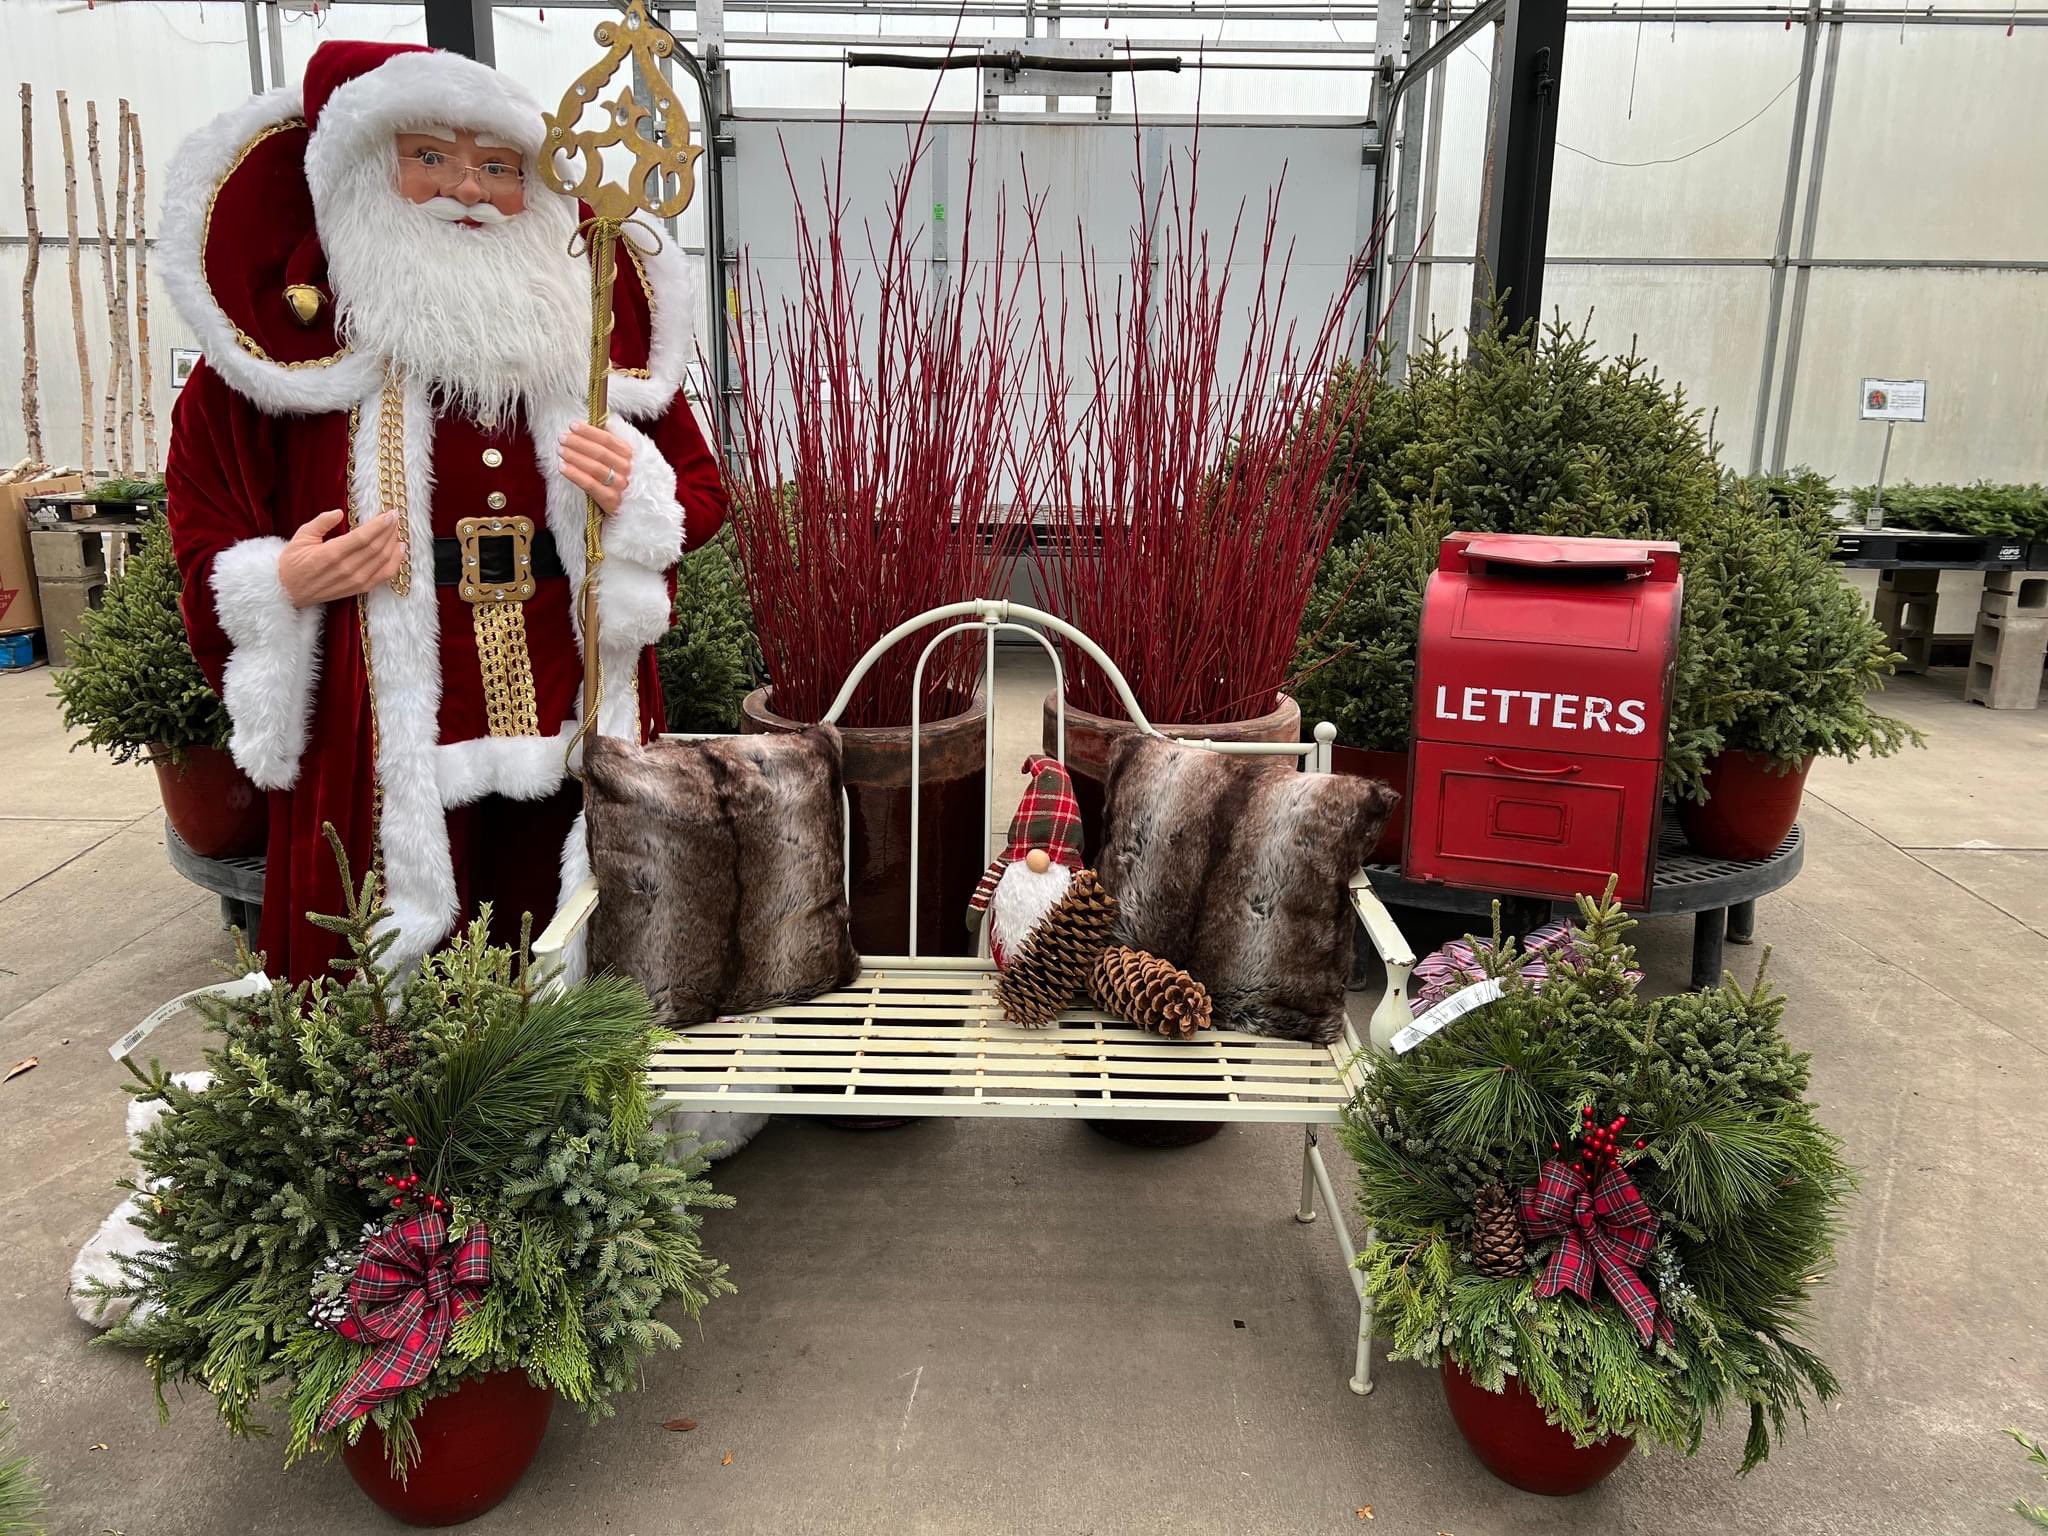 CHRISTMAS FLORAL DISPLAY - Pahl's Market - Apple Valley, MN